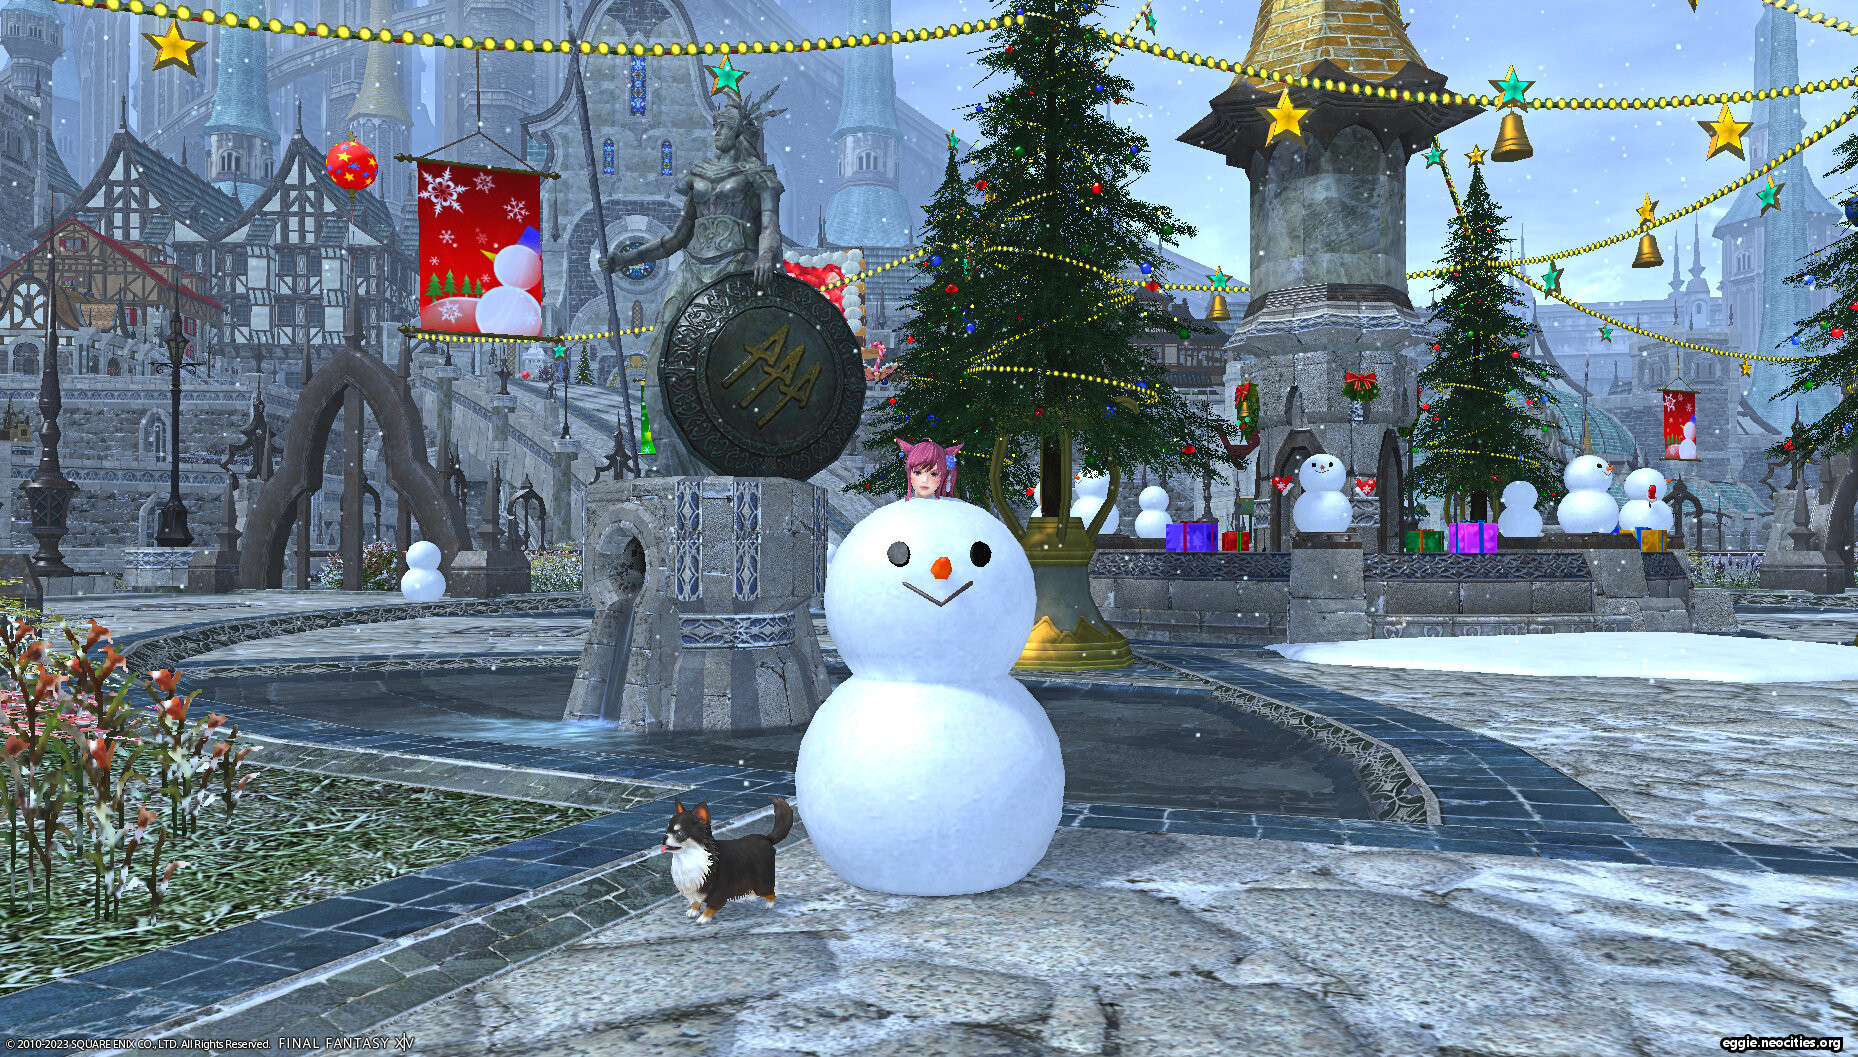 Zel standing inside of a snowman, with just her head poking through the top.